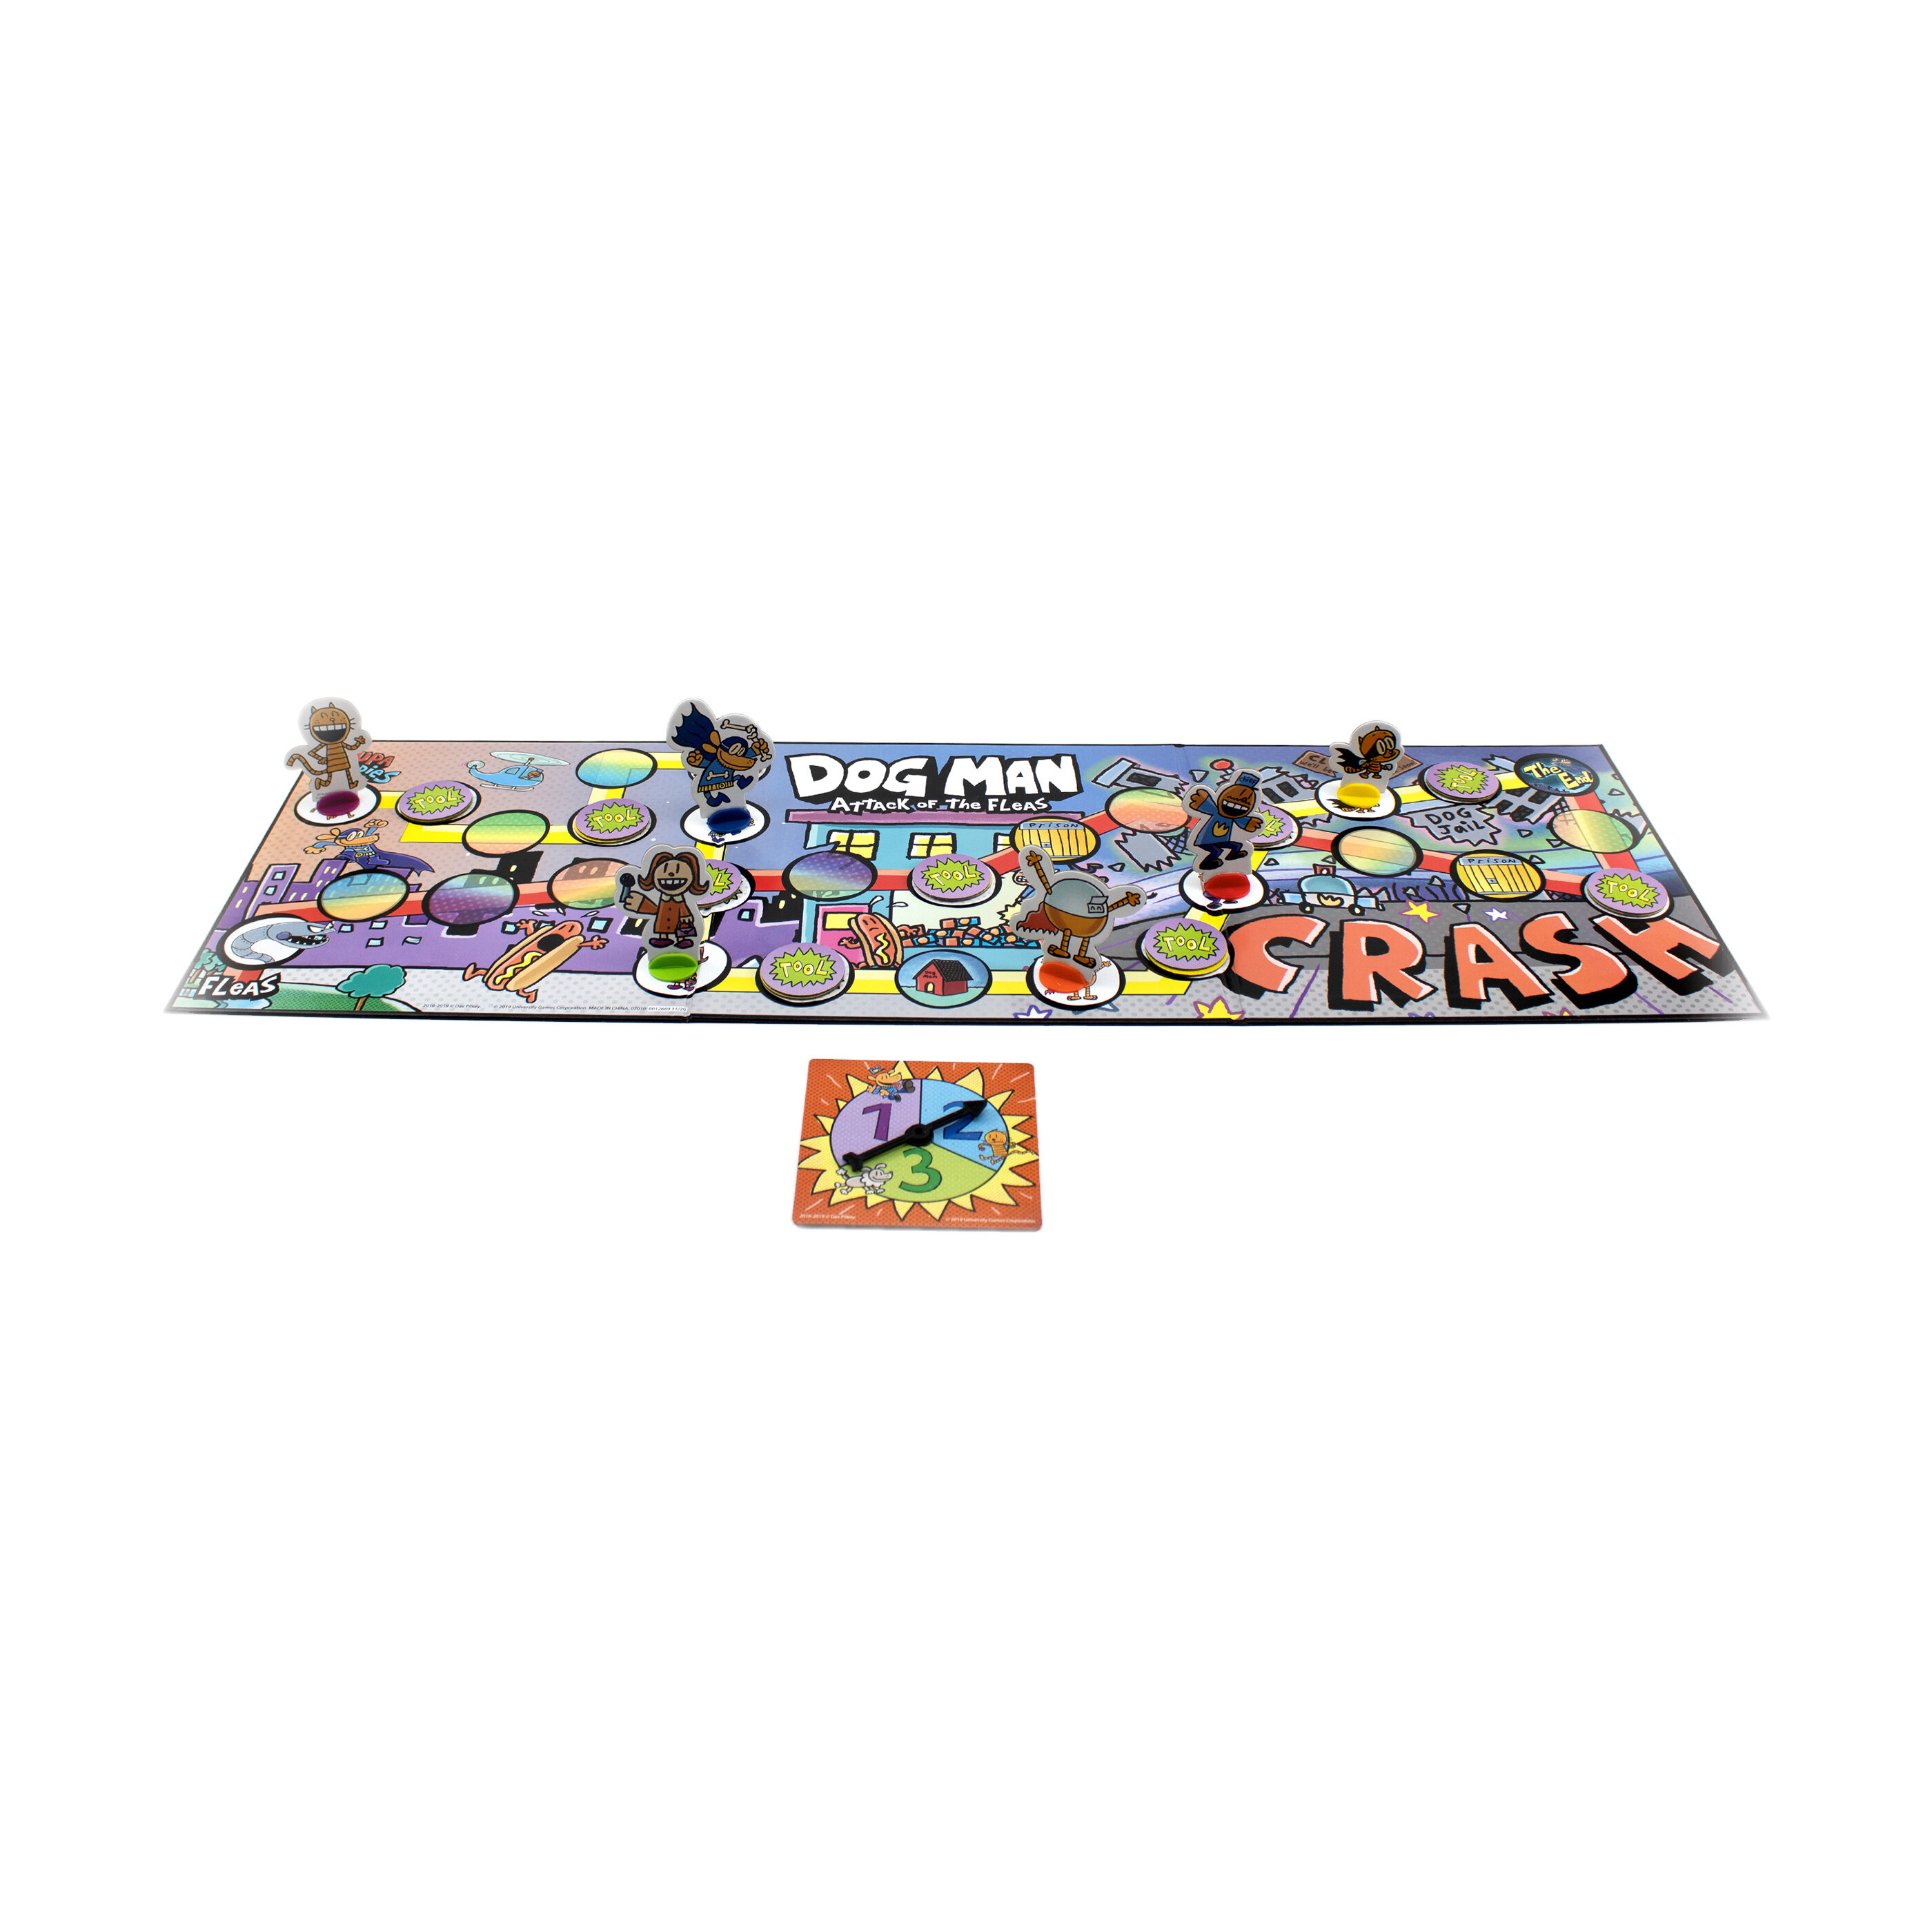 University Games 07010 Dog Man Attack of The Fleas Board Game for sale online 